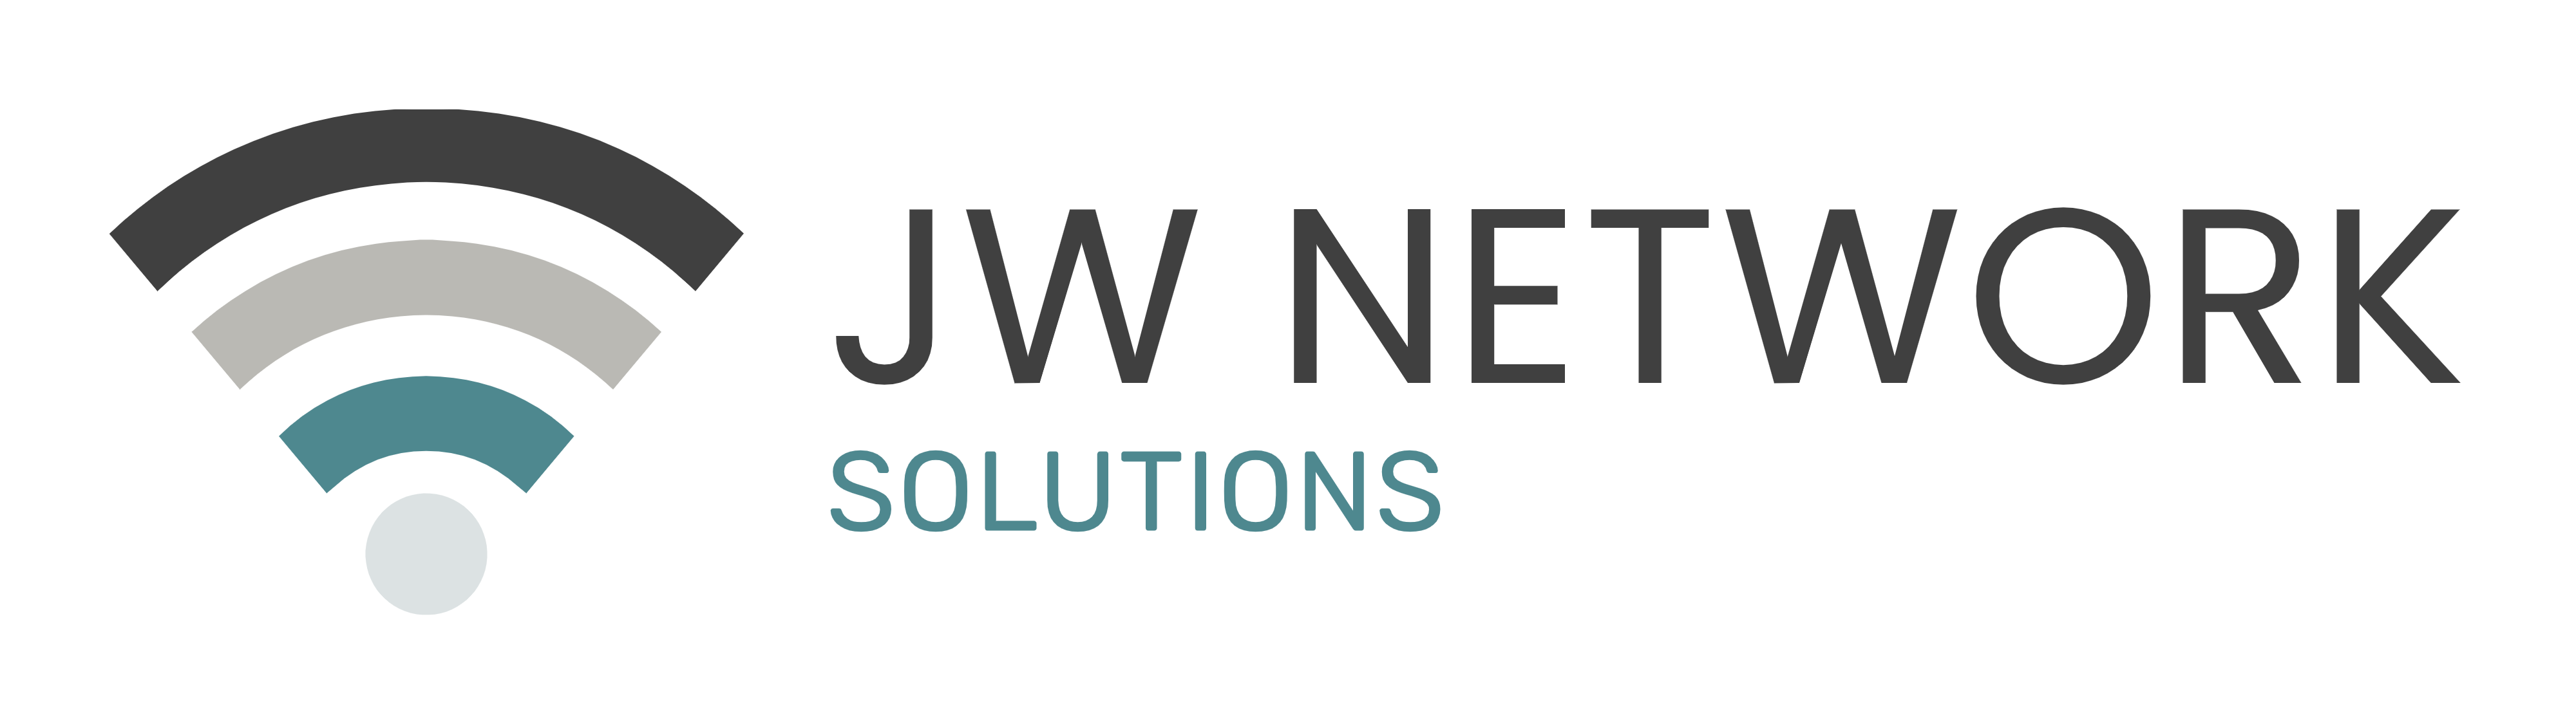 JW Network Solutions